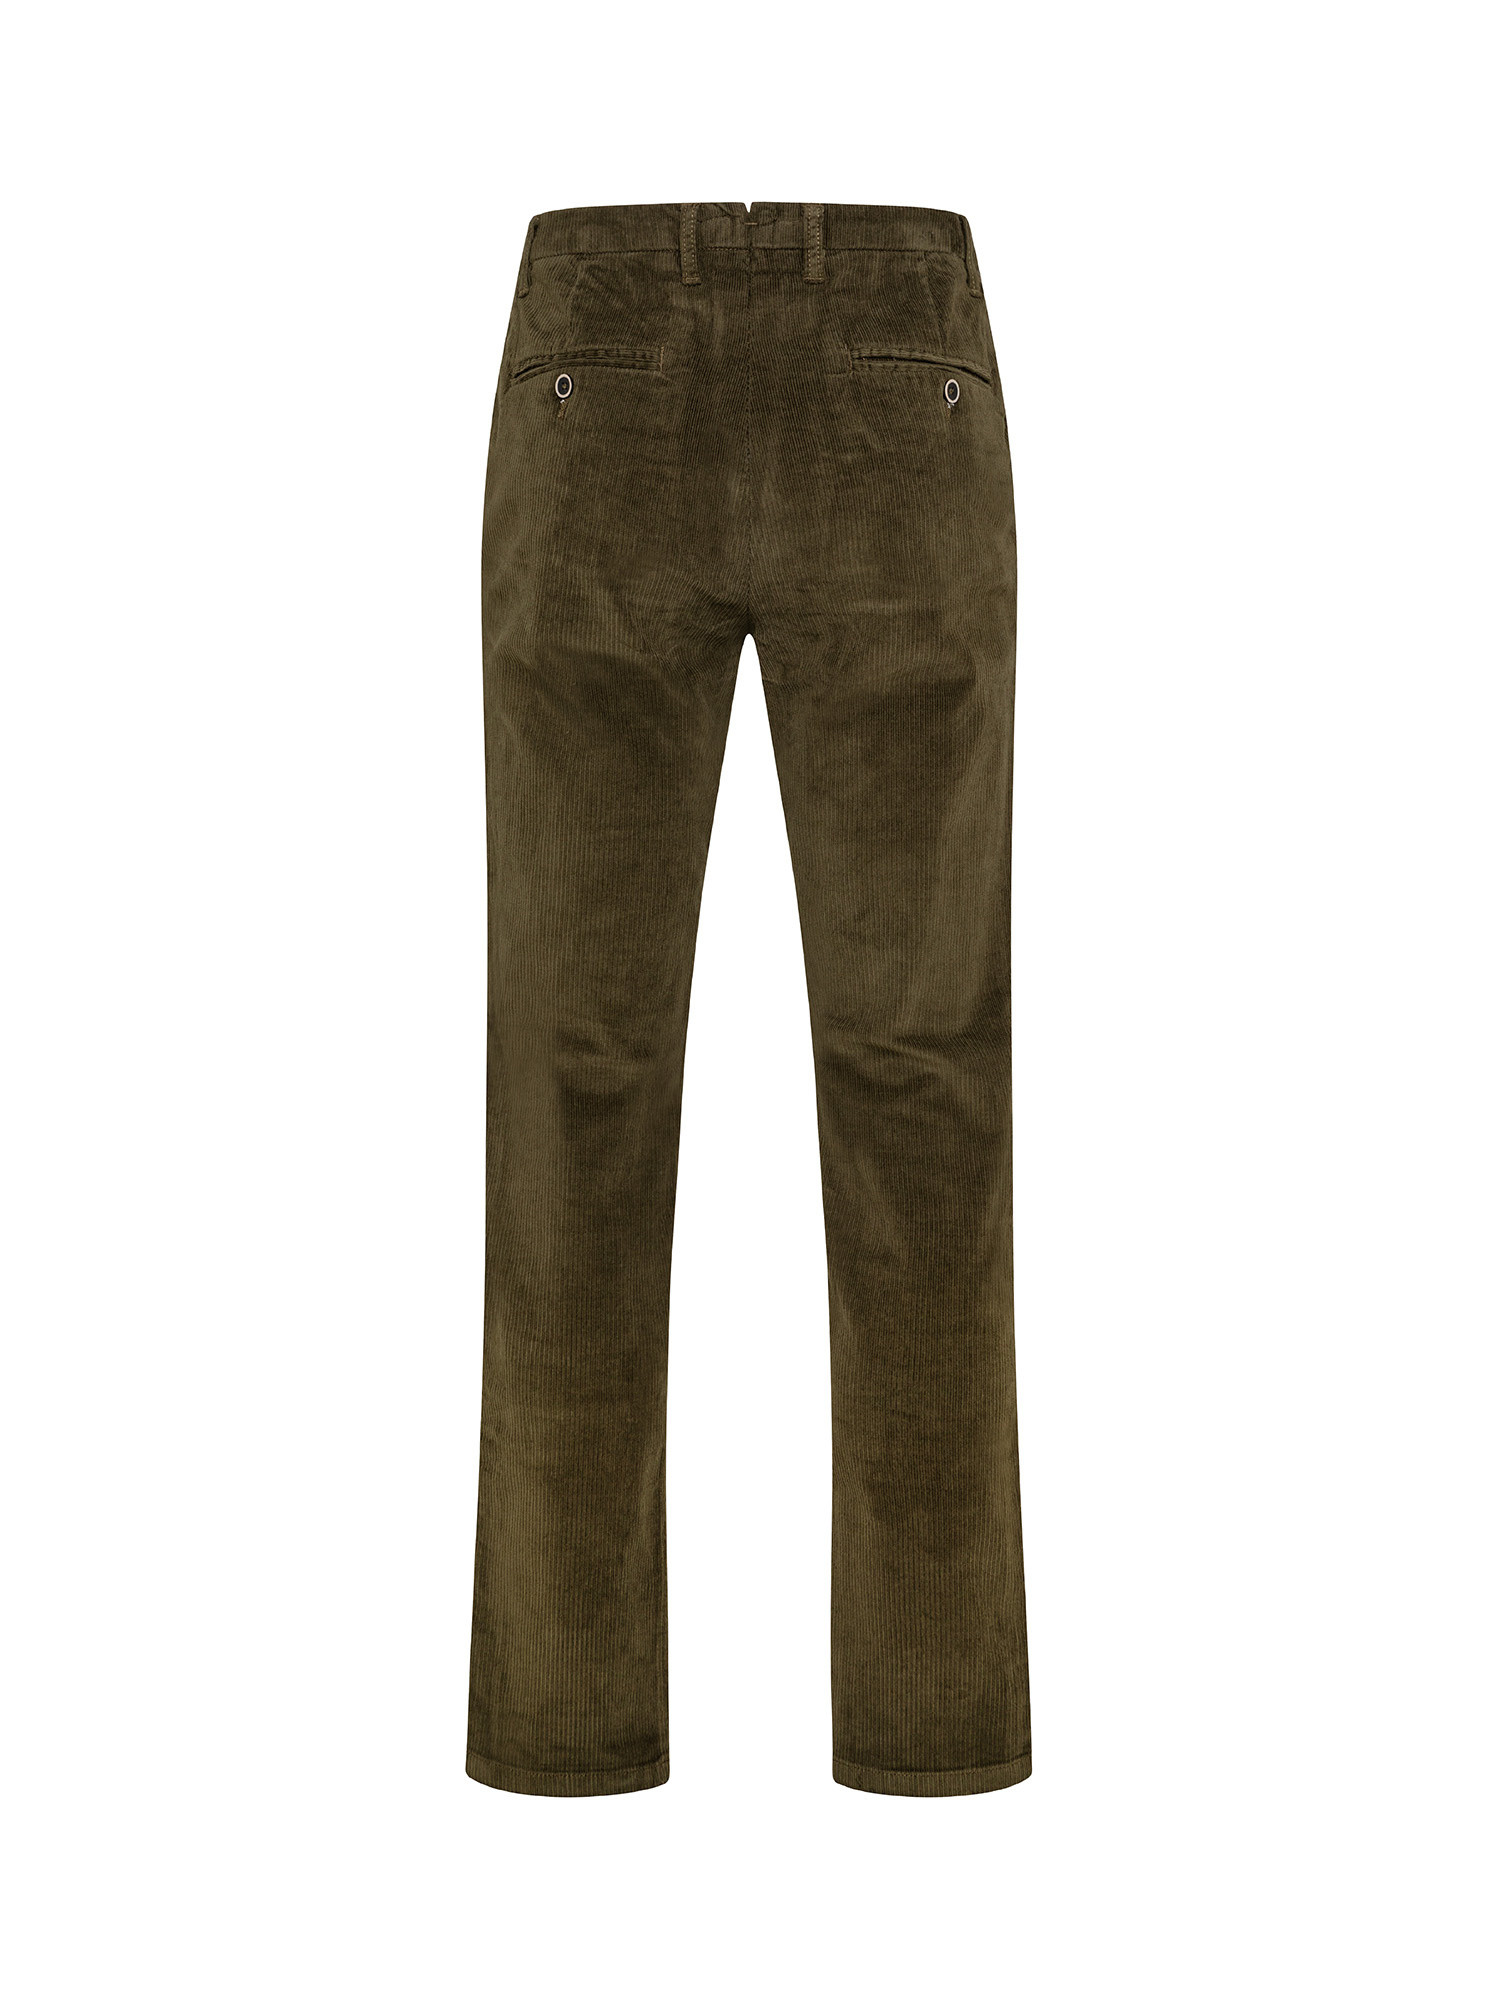 JCT - Pantalone chino in velluto slim fit, Verde, large image number 1